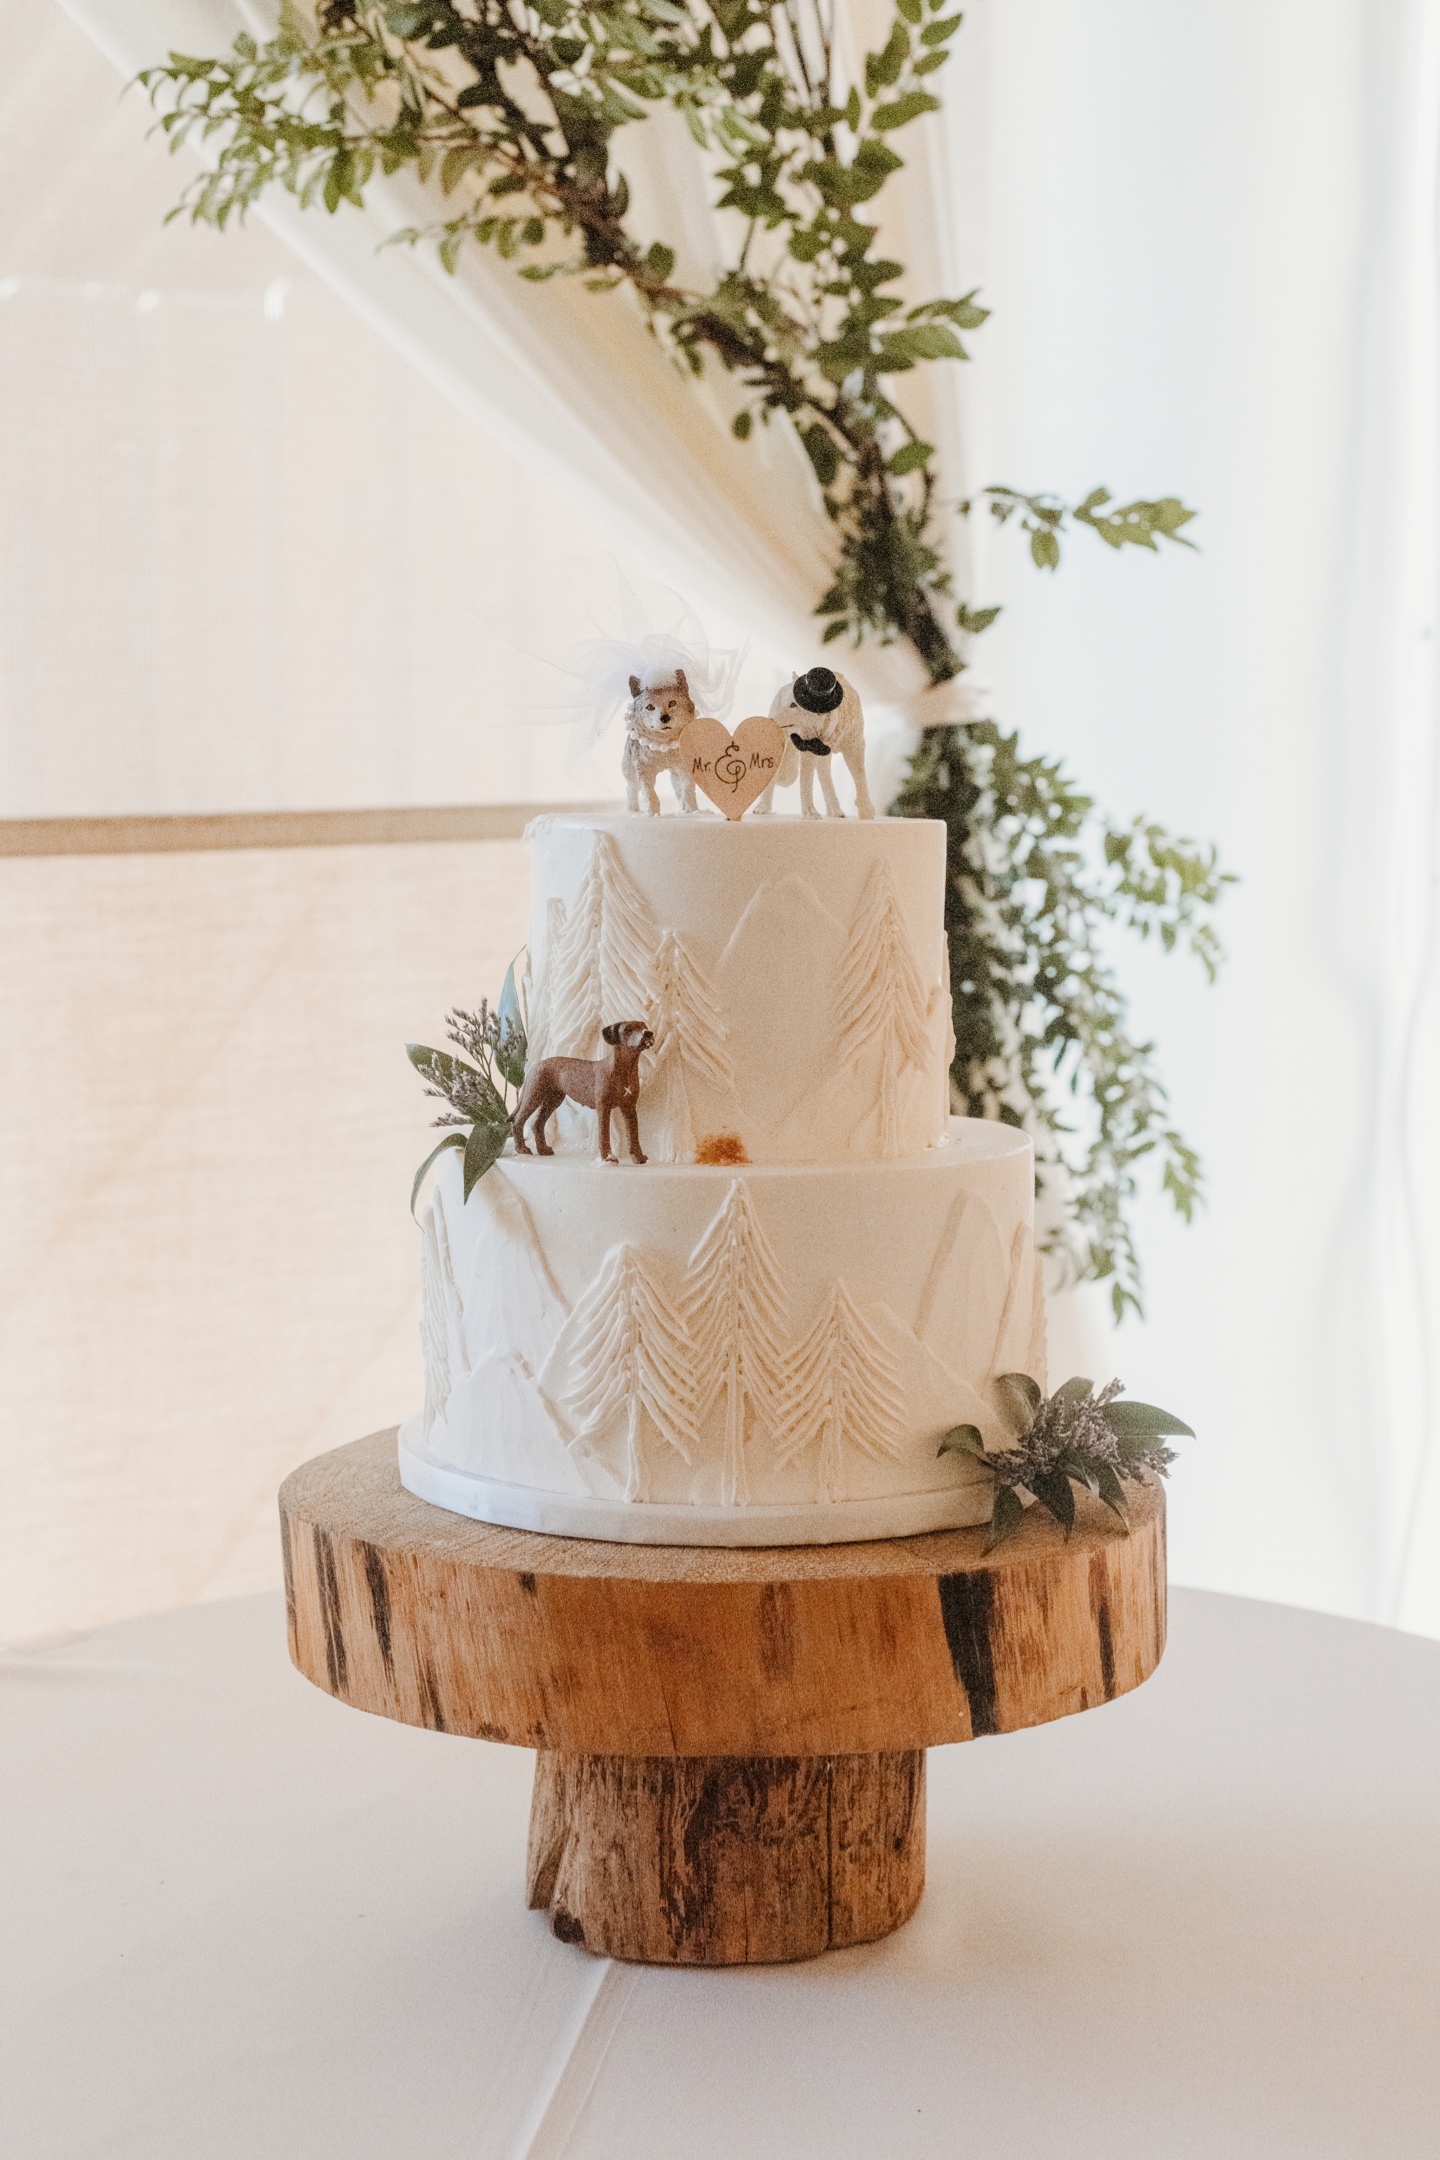 Two tier wedding cake decorated with trees and dog figurines on wood cake stand. Wedding cake is perfect for a Yosemite wedding.